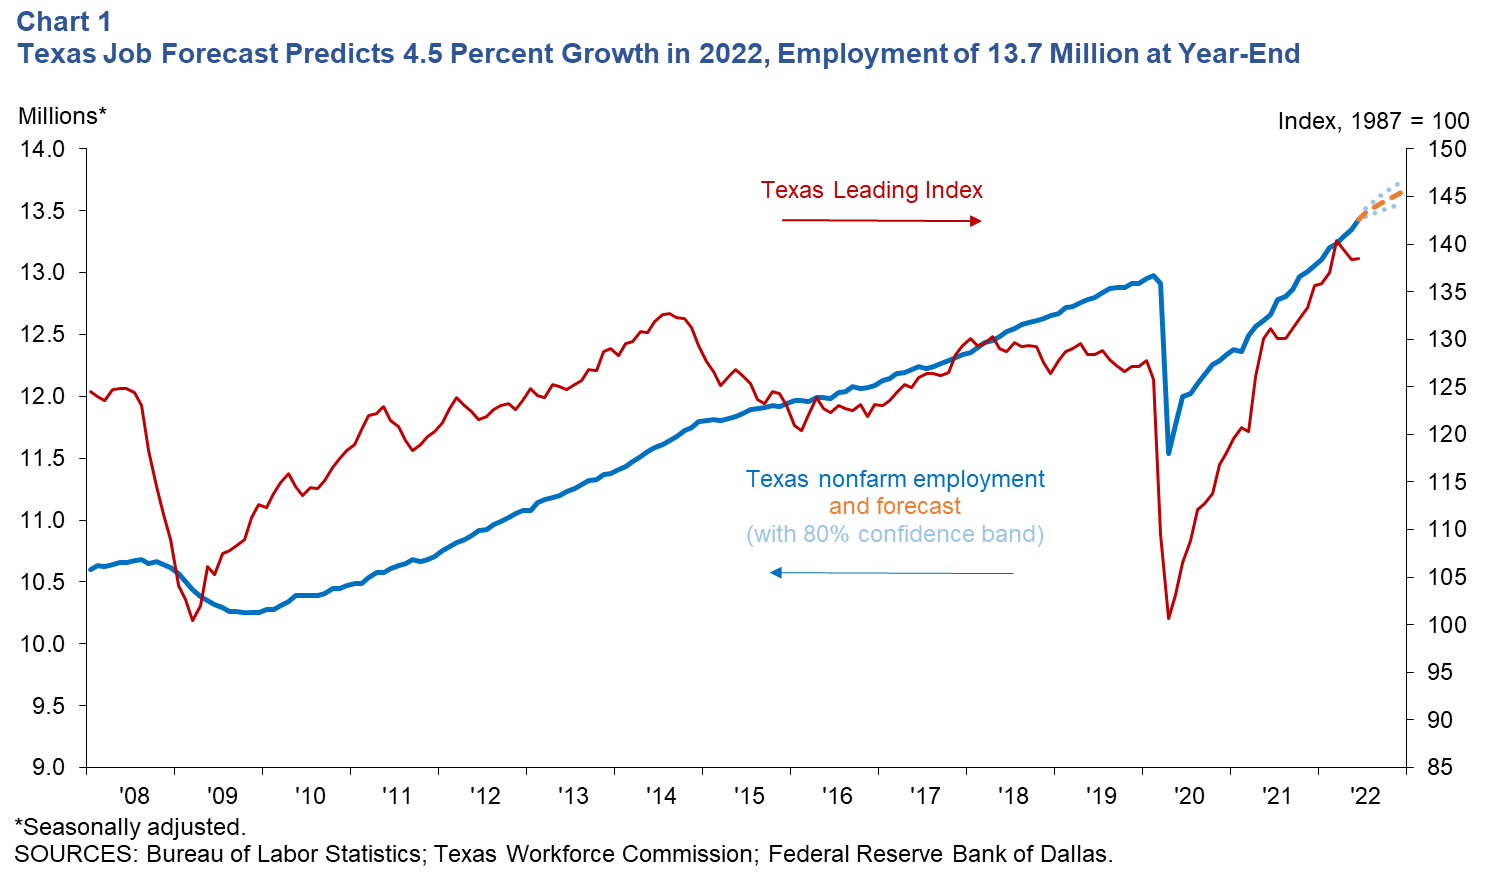 Texas Job Forecast Predicts 4.0 Percent Growth in 2022, Employment to End the Year at 13.6 Million